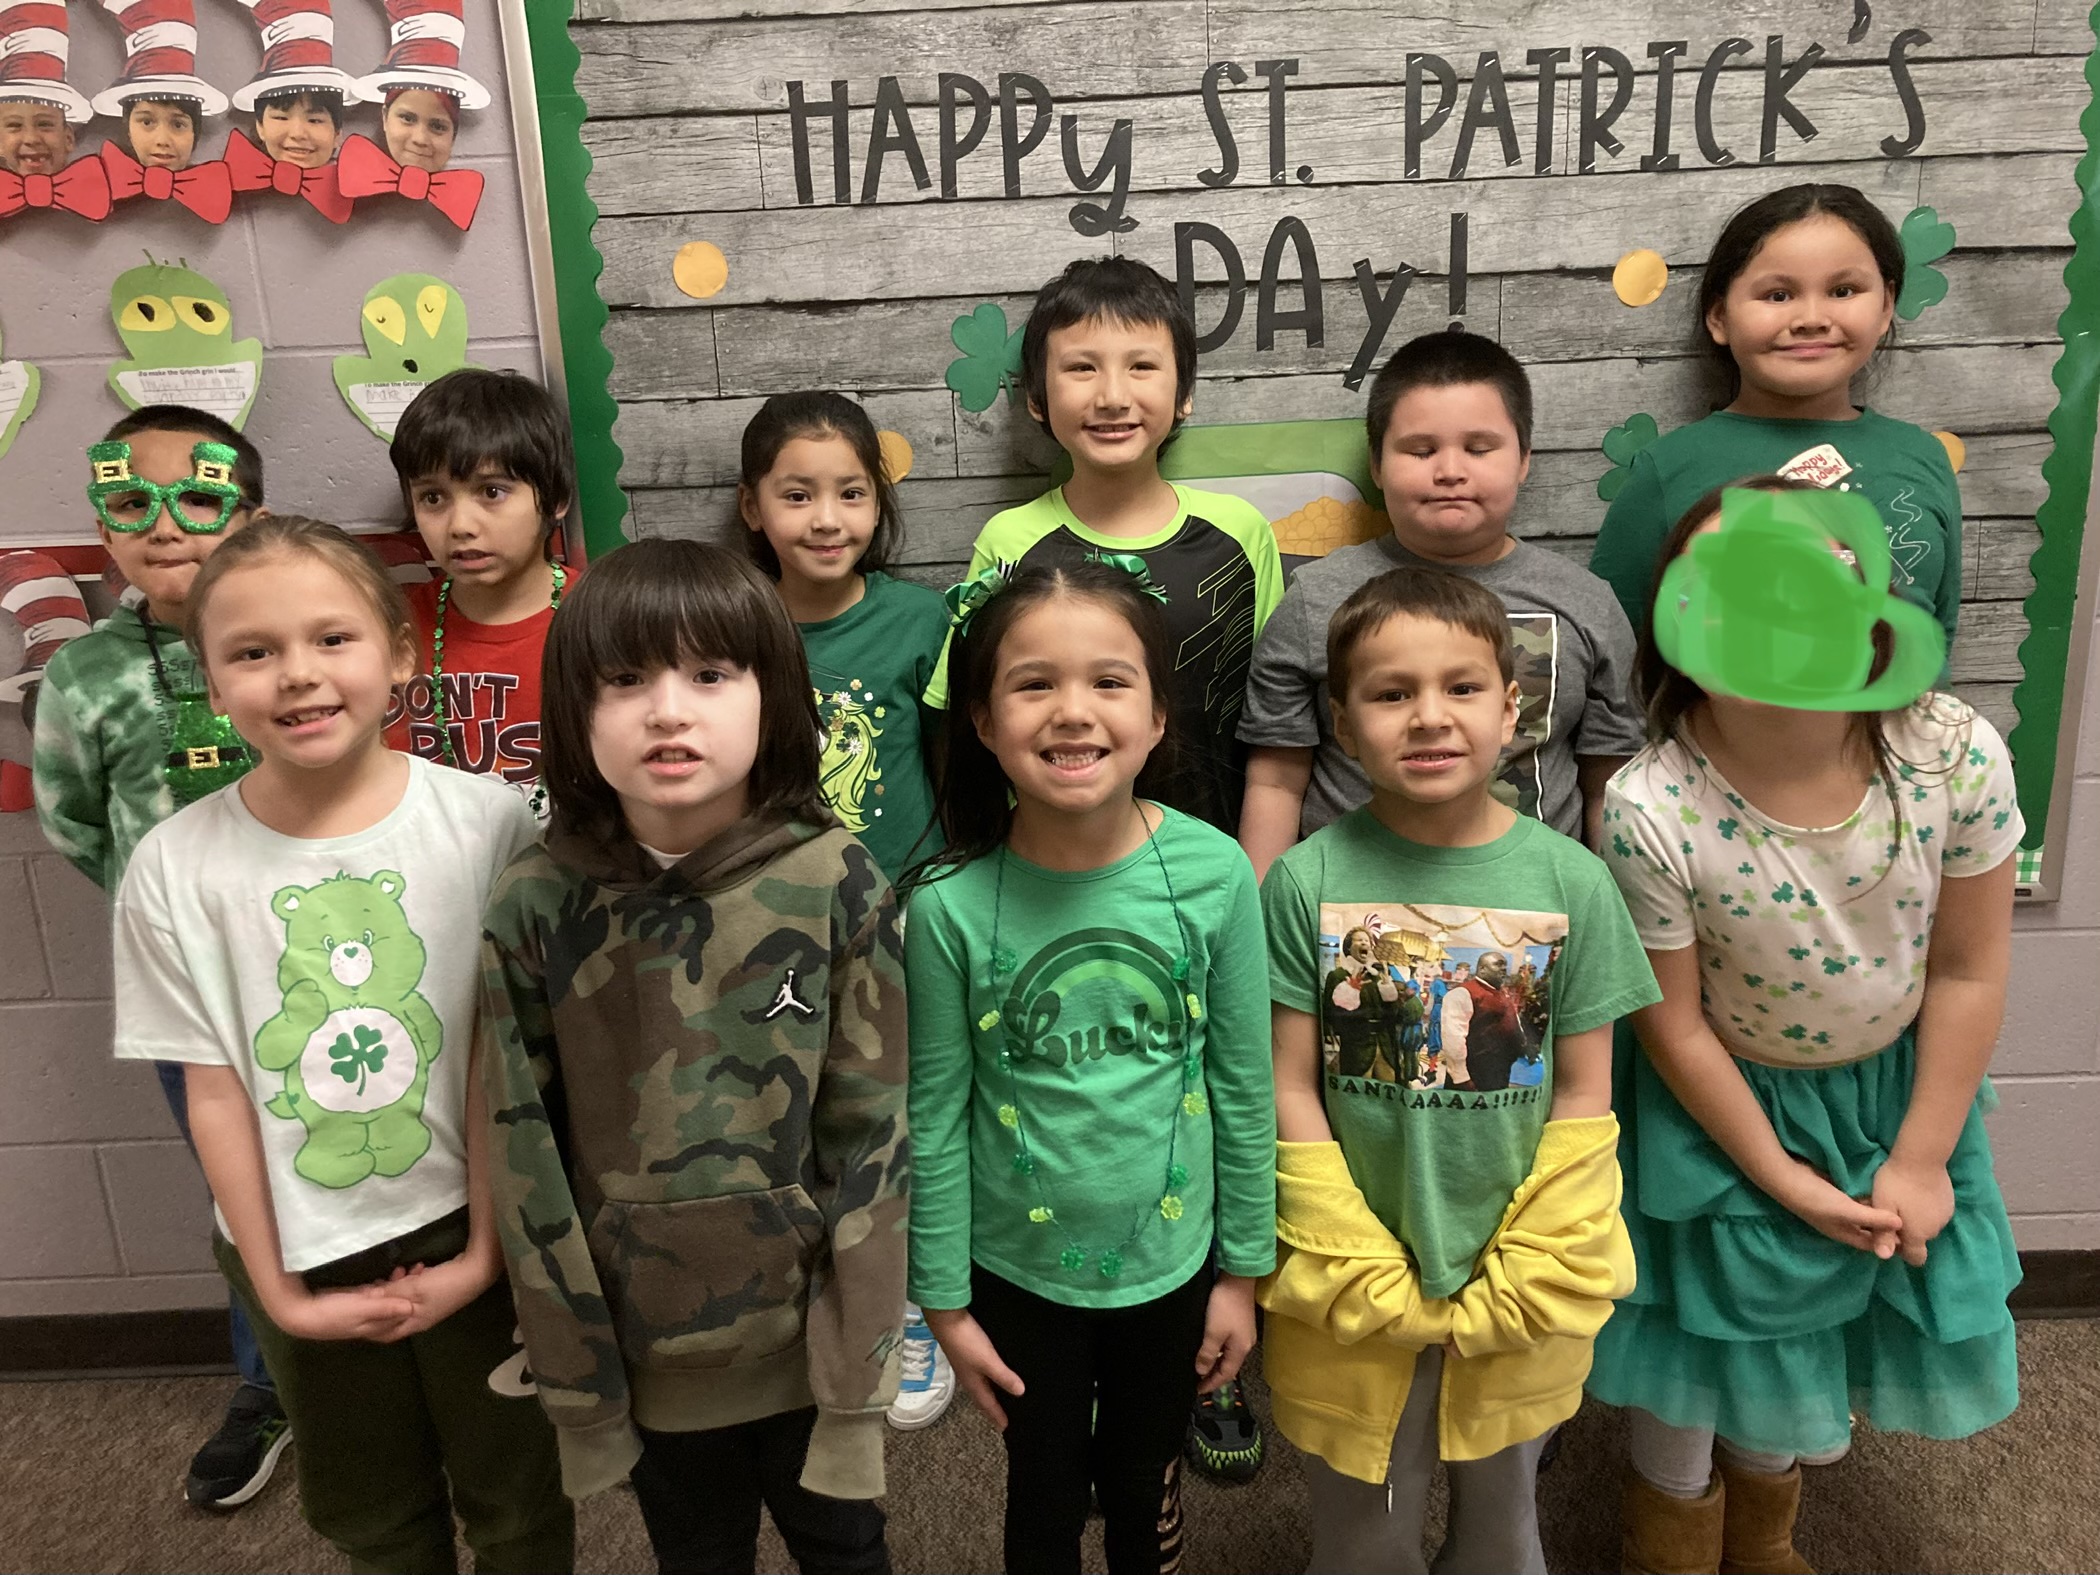 Group 1 of Elementary Students wearing St. Patrick's Day shirts